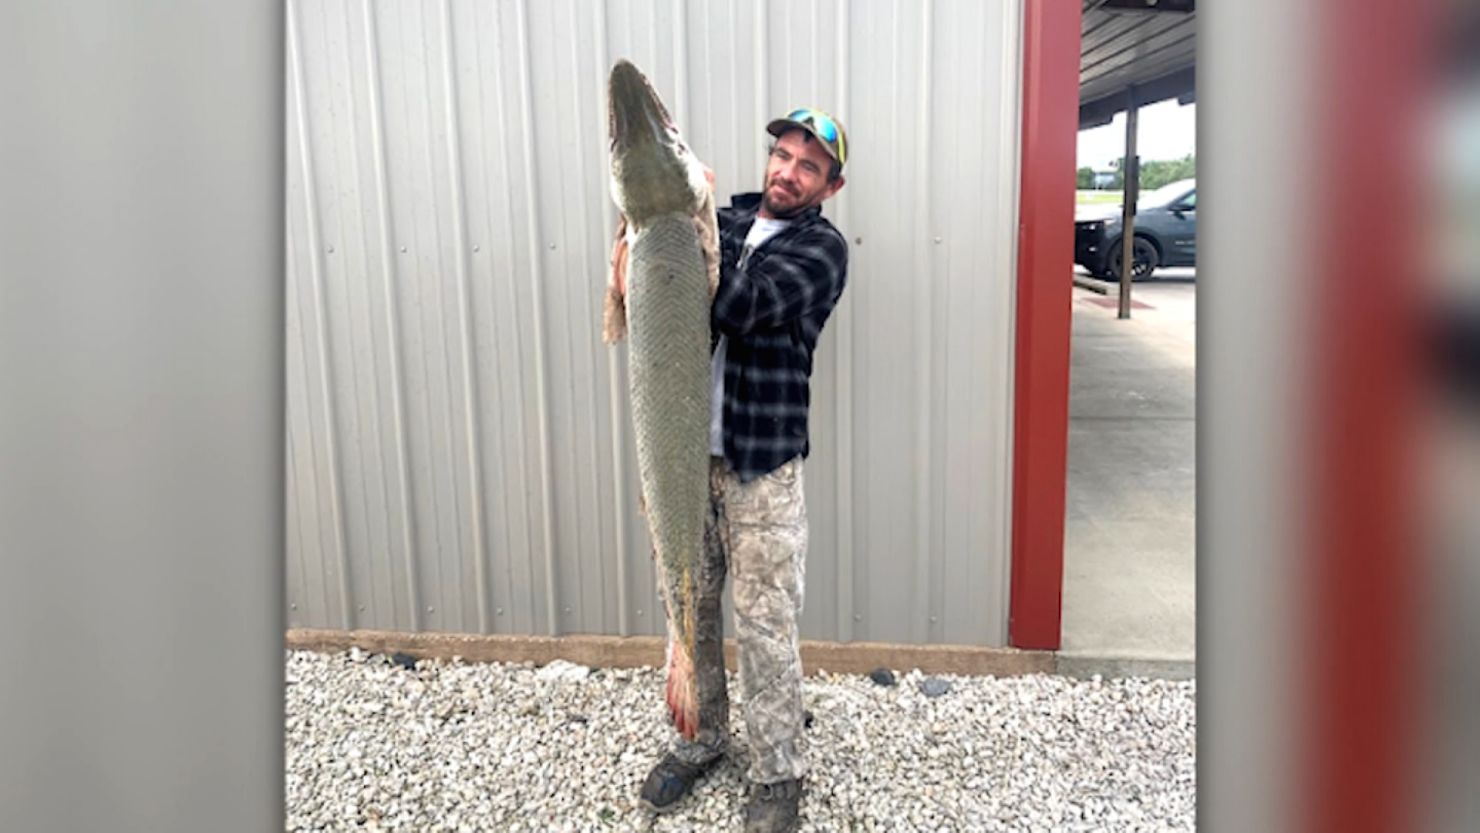 Angler Danny Lee "Butch" Smith caught the 4.5-foot, 39.5-pound alligator gar.